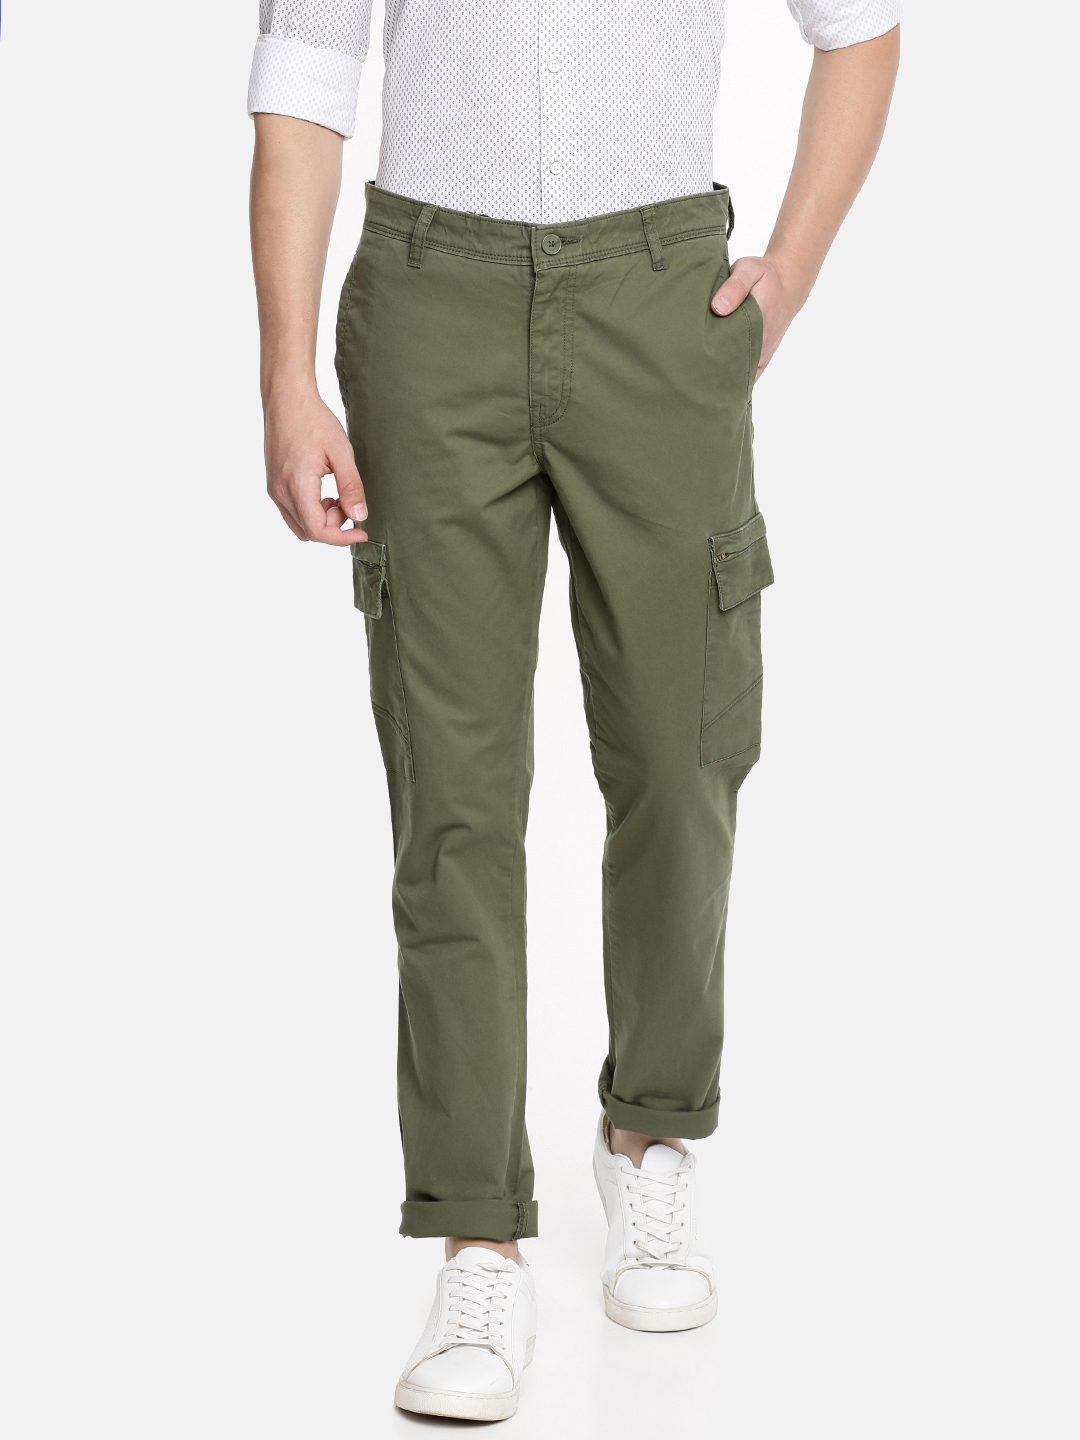 Buy Olive Trousers  Pants for Men by JOHN PLAYERS JEANS Online  Ajiocom